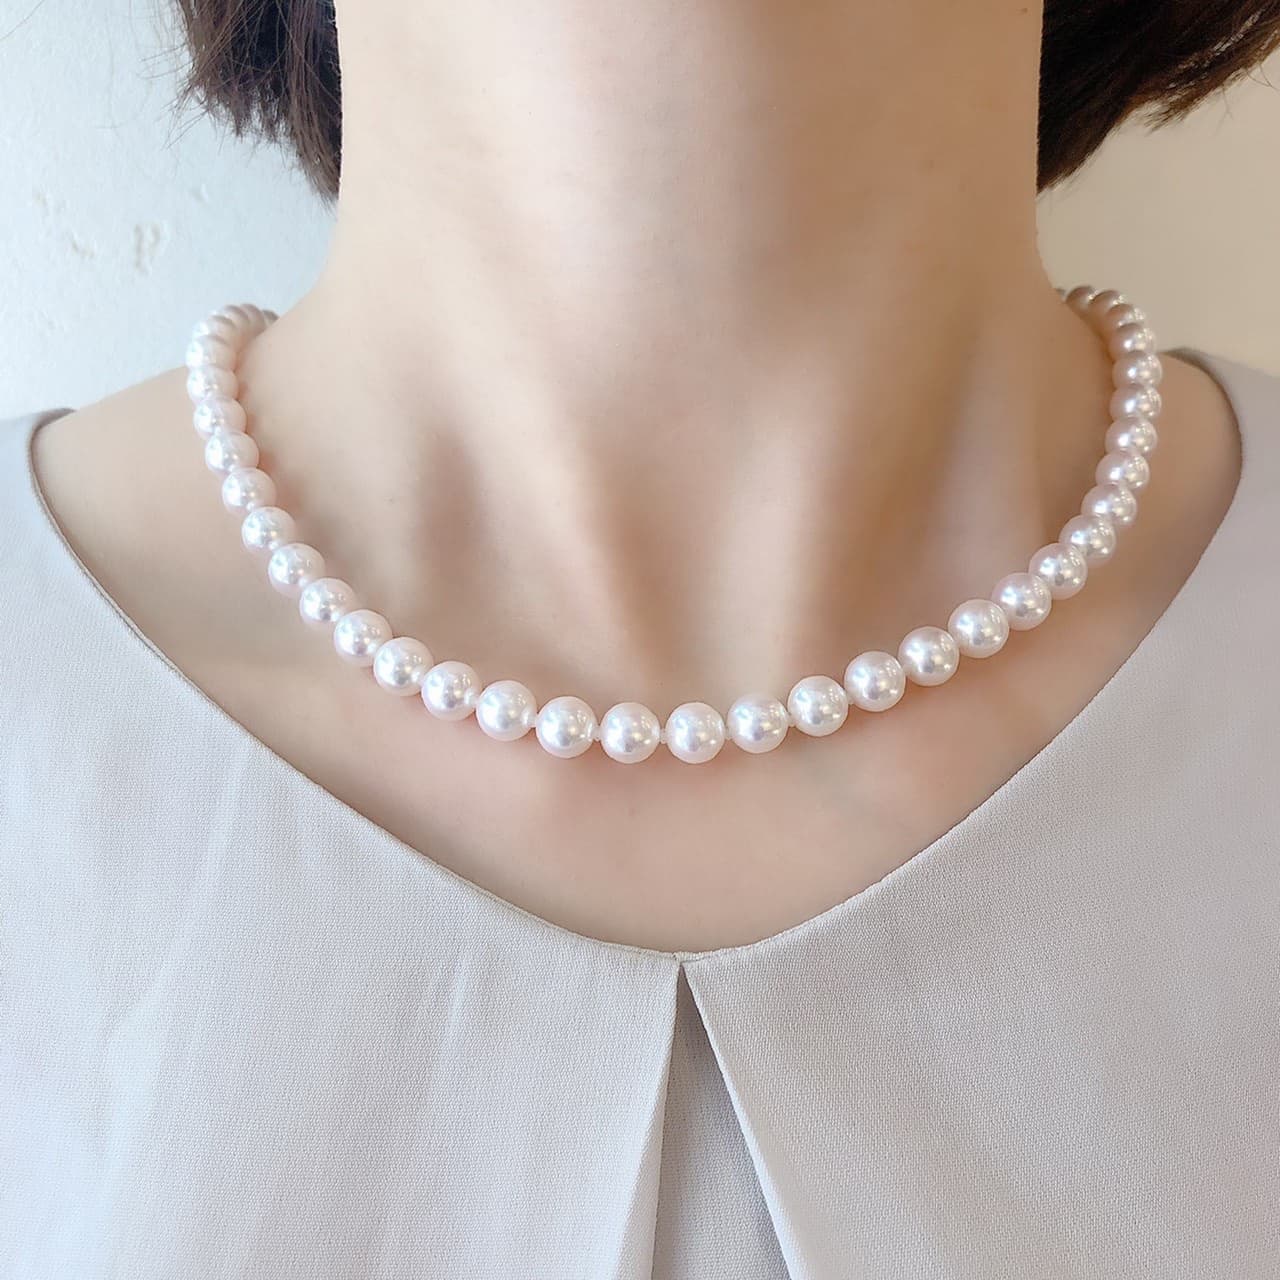 Akoya pearl necklace & pearl earrings set【M】/アコヤ真珠ネックレス＆イヤリングセット Mサイズ-3